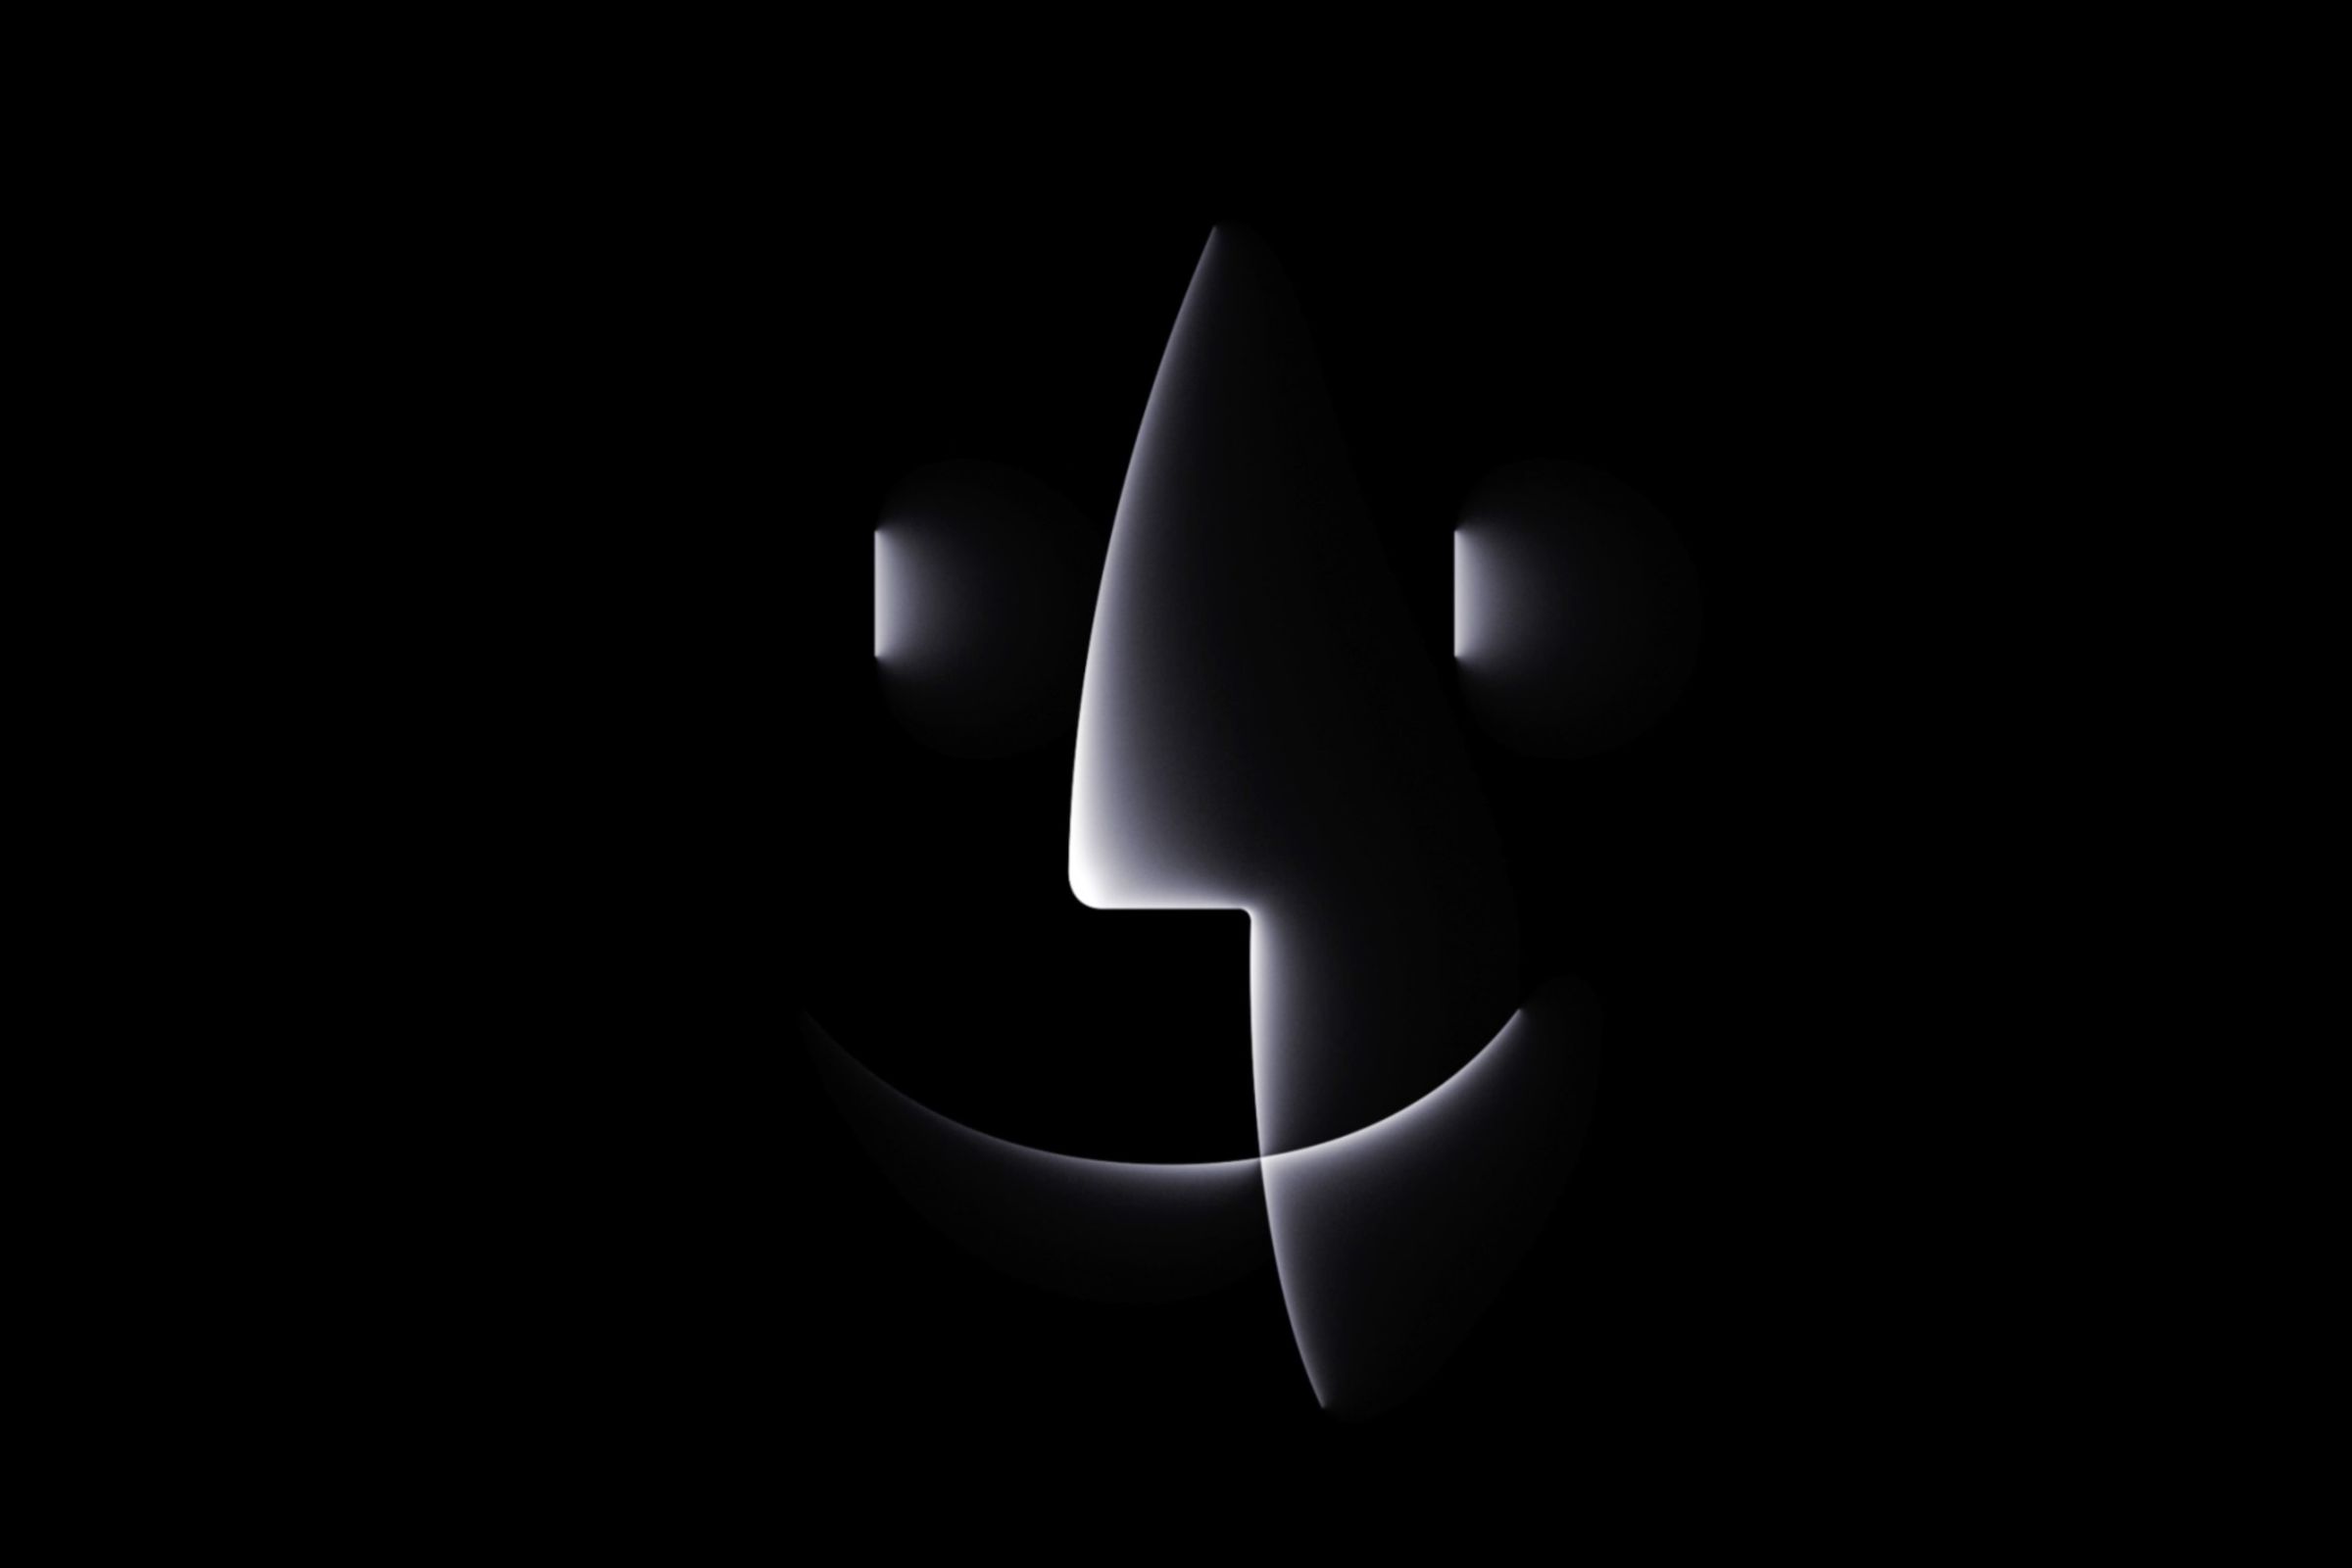 Apple’s Finder two-face icon in black with a ghostly white outline